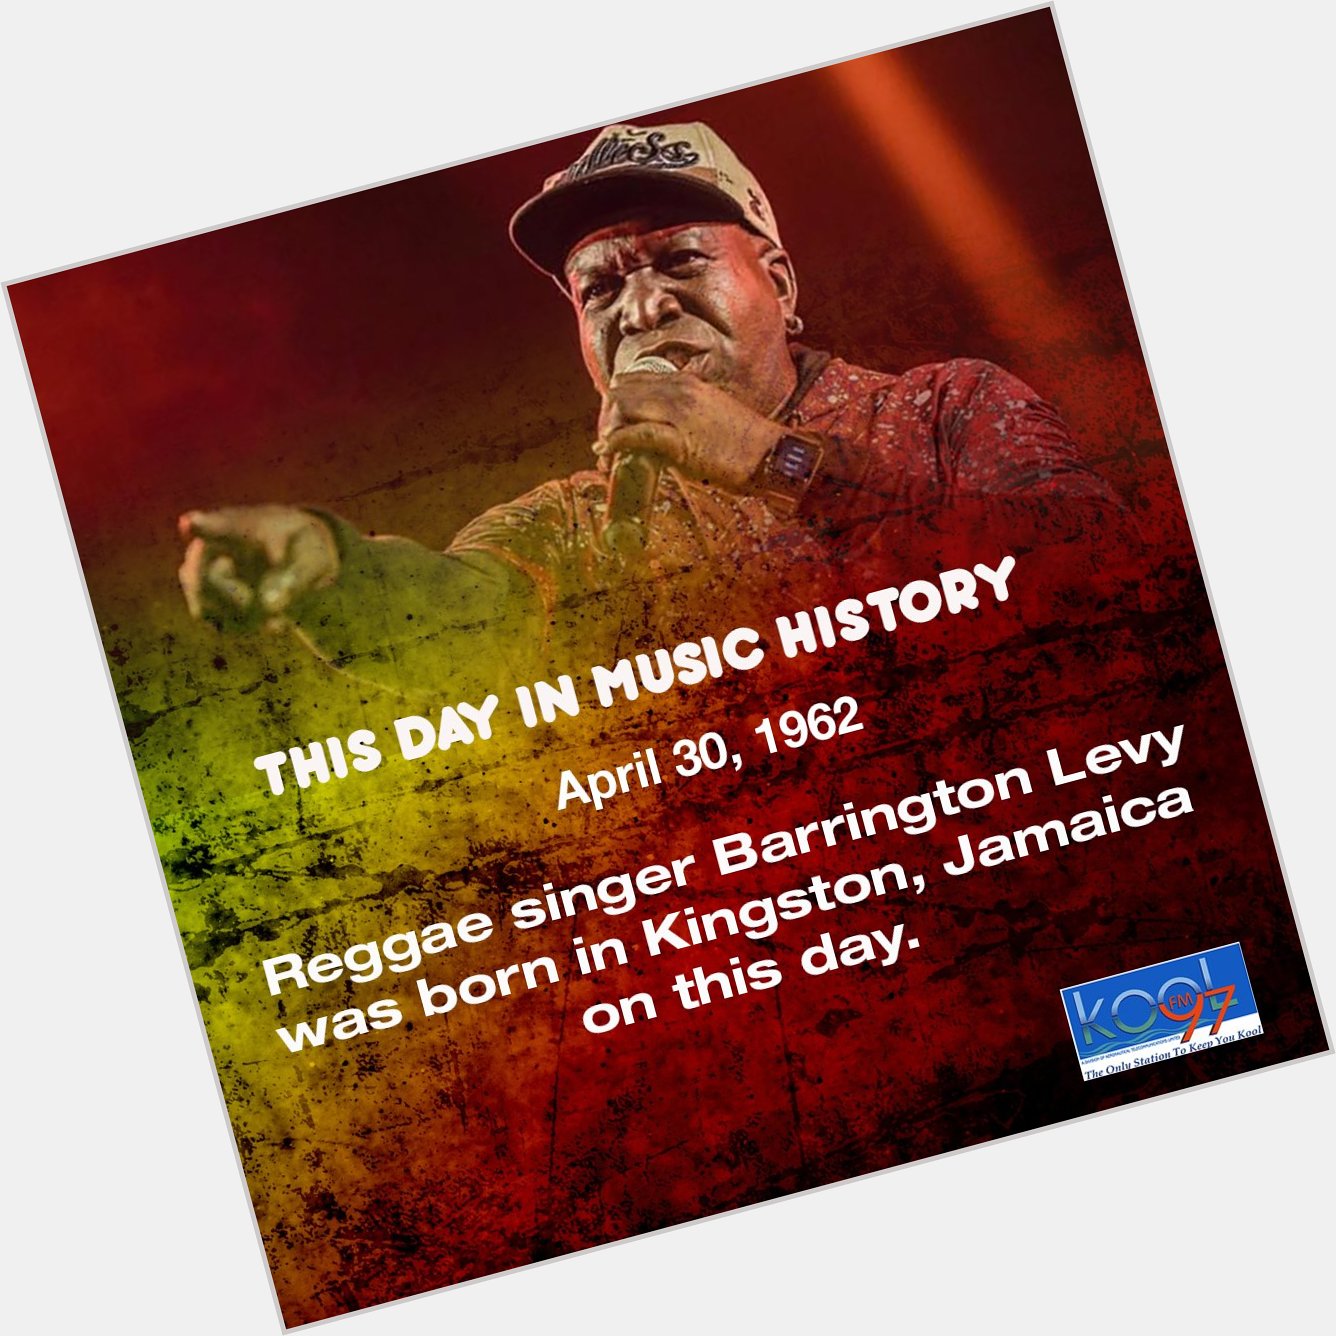 Celebrating another great Jamaican. HAPPY BIRTHDAY BARRINGTON LEVY  